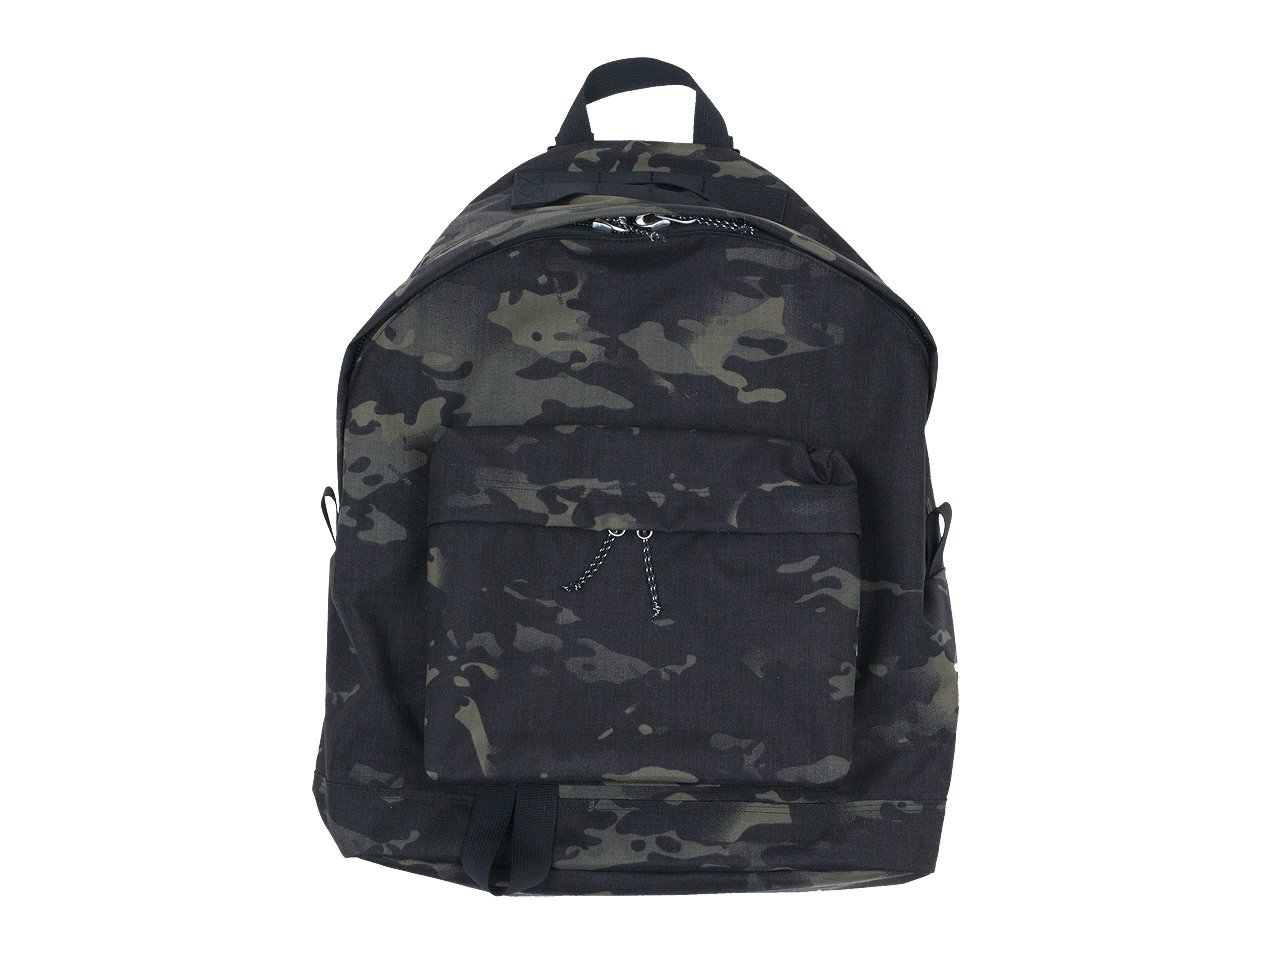 ENDS and MEANS Daytrip Backpack BLACK MULTI CAM